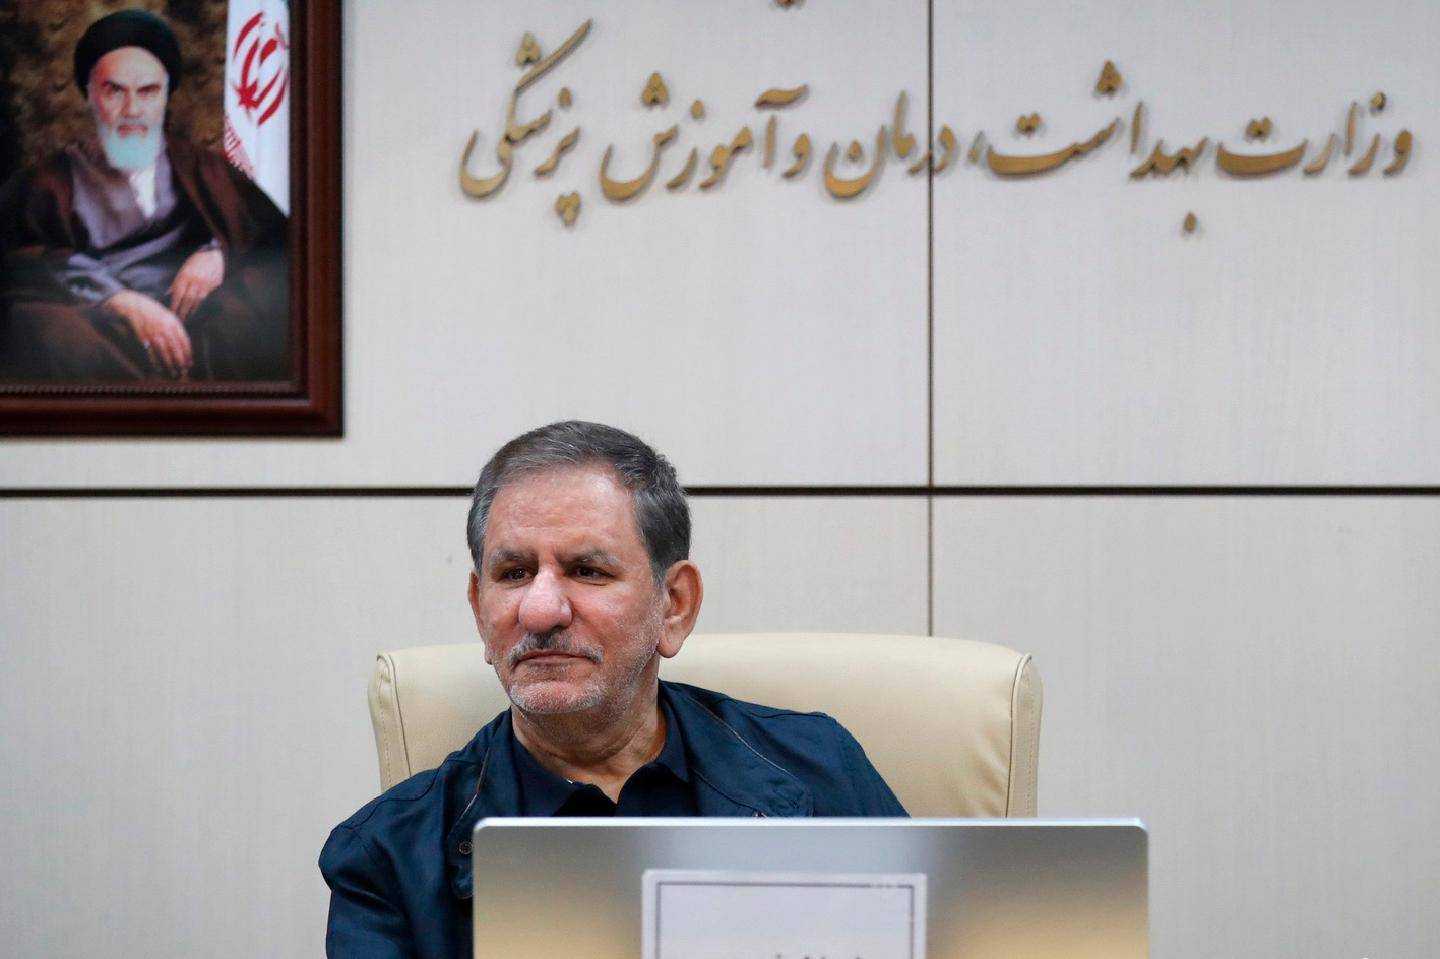 In this Feb. 28, 2020 photo, released by official website of the Office of the Iranian Vice-President, Senior Vice-President Eshaq Jahangiri sits in front of a painting of the late revolutionary founder Ayatollah Khomeini during a top-level meeting on prevention and combating the coronavirus, in Tehran, Iran. Jahangiri and two other Cabinet members have contracted the new coronavirus, semiofficial Fars News Agency reported Wednesday, March 11, 2020. The vast majority of people recover from the new virus. (Office of the Iranian Vice President via AP)